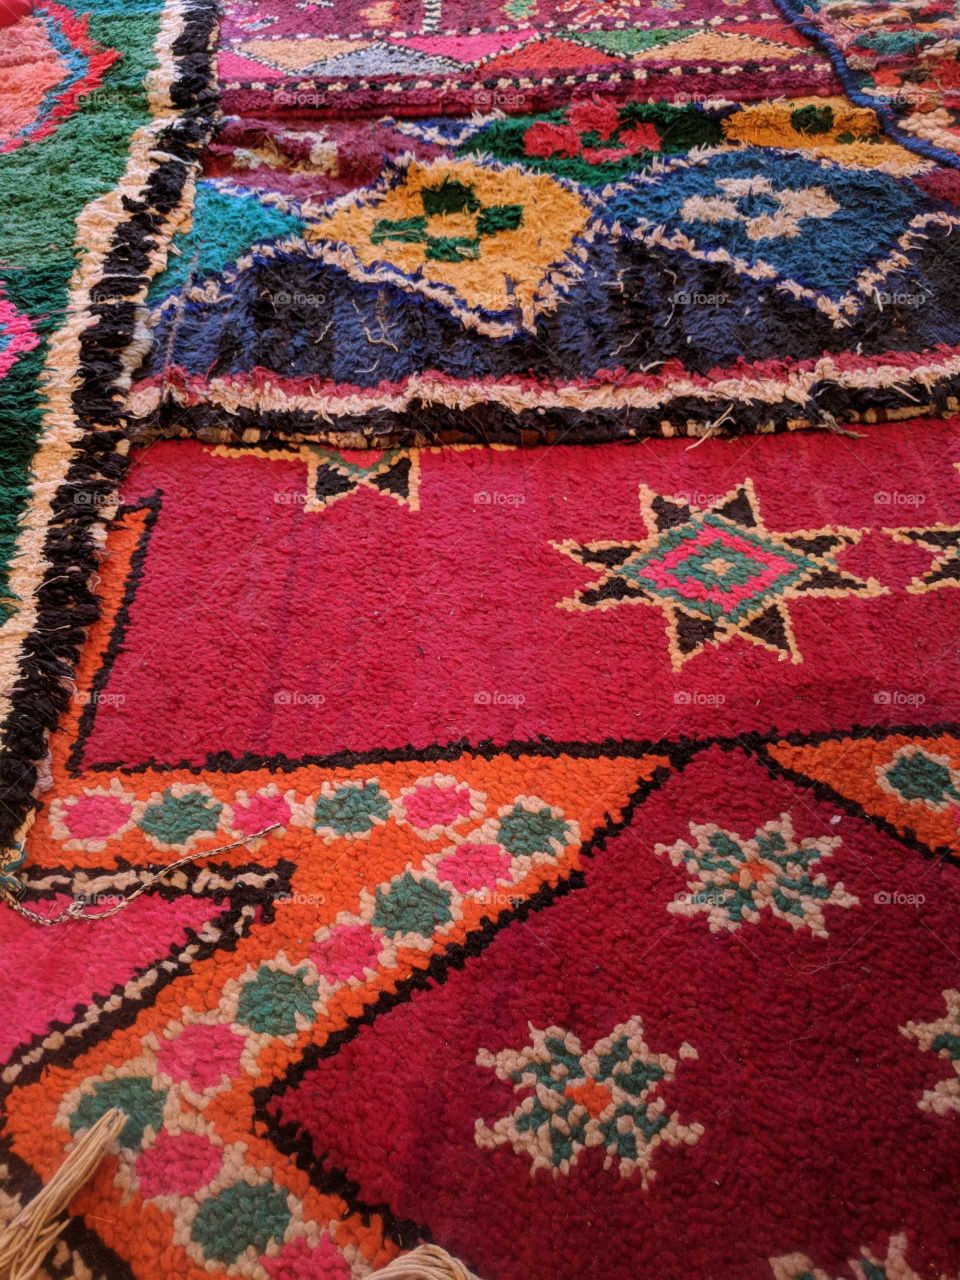 Ornate, Handwoven, Colorful, Handmade Rugs with A Variety of Patterns from a Small Village in Morocco